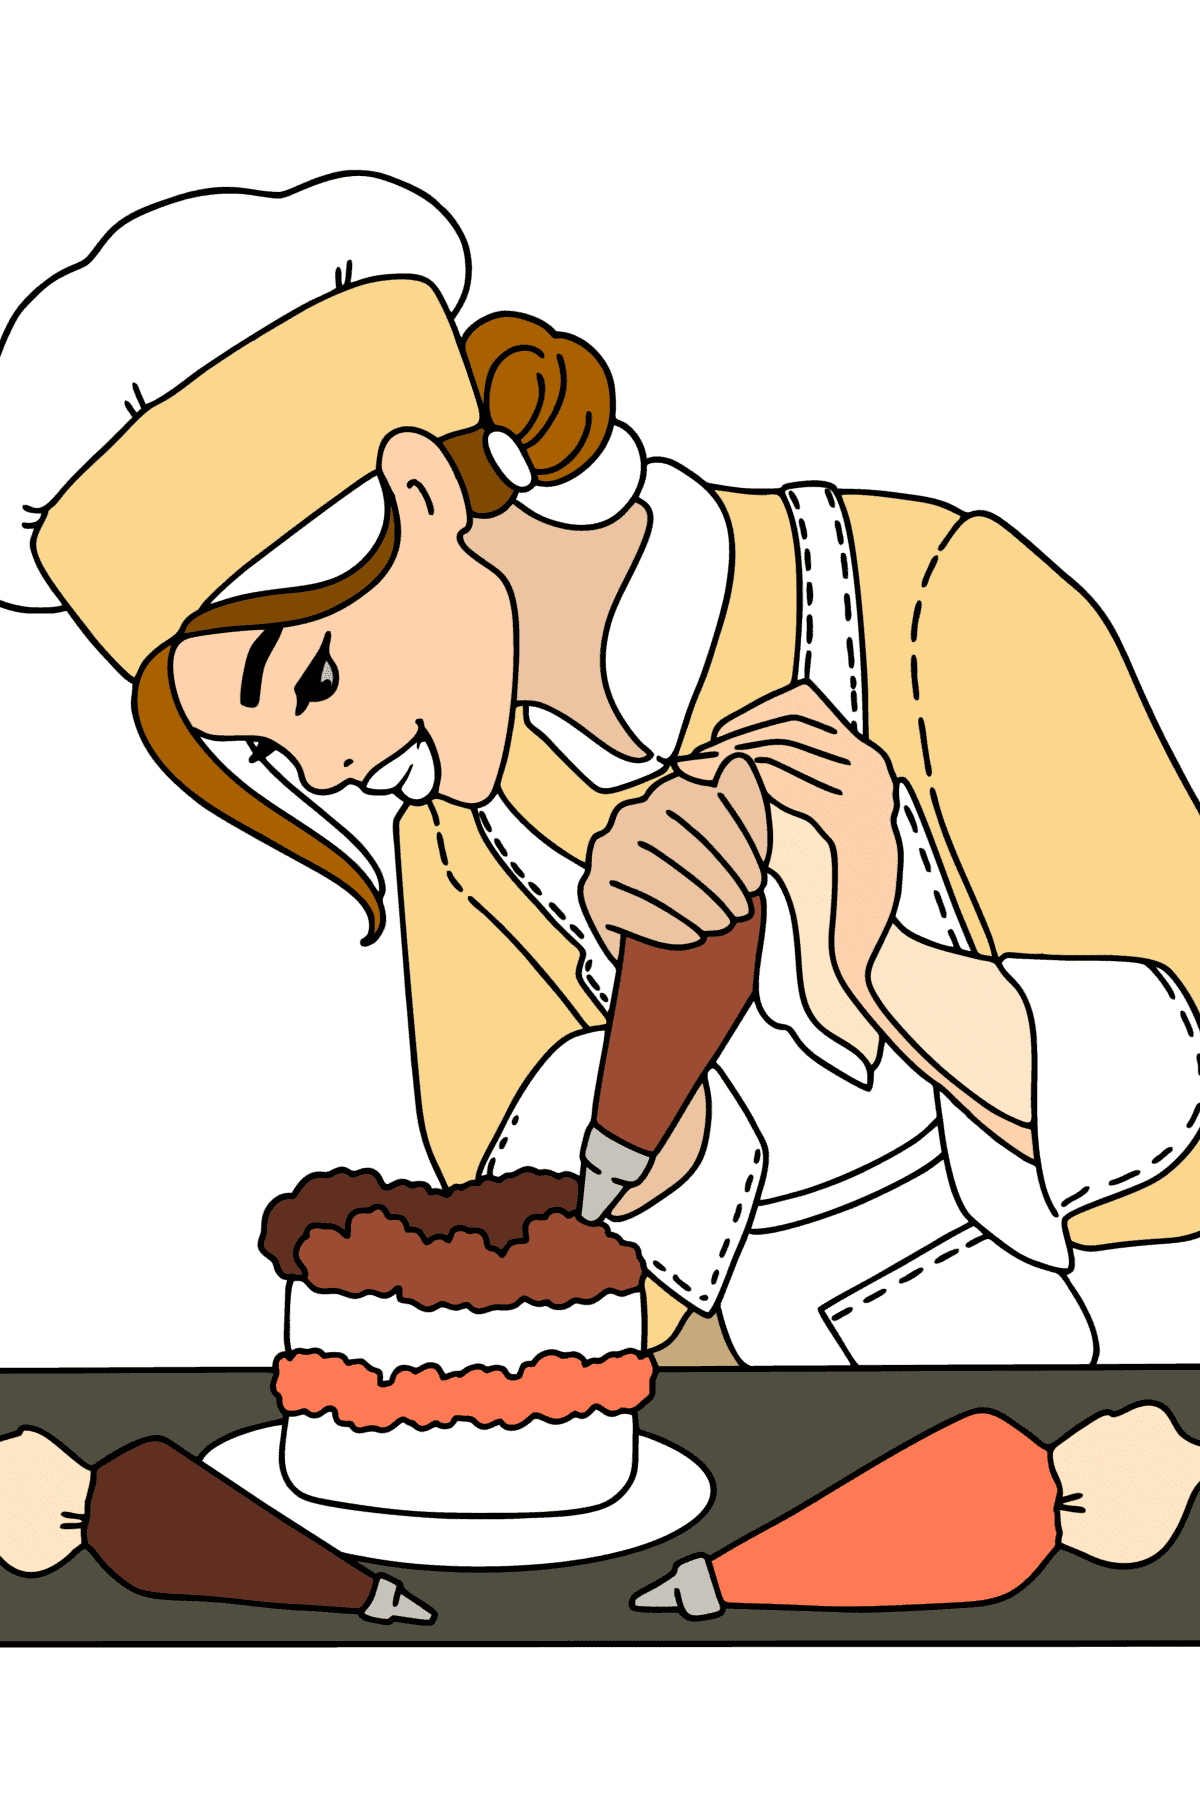 Girl confectioner сoloring page - Coloring Pages for Kids